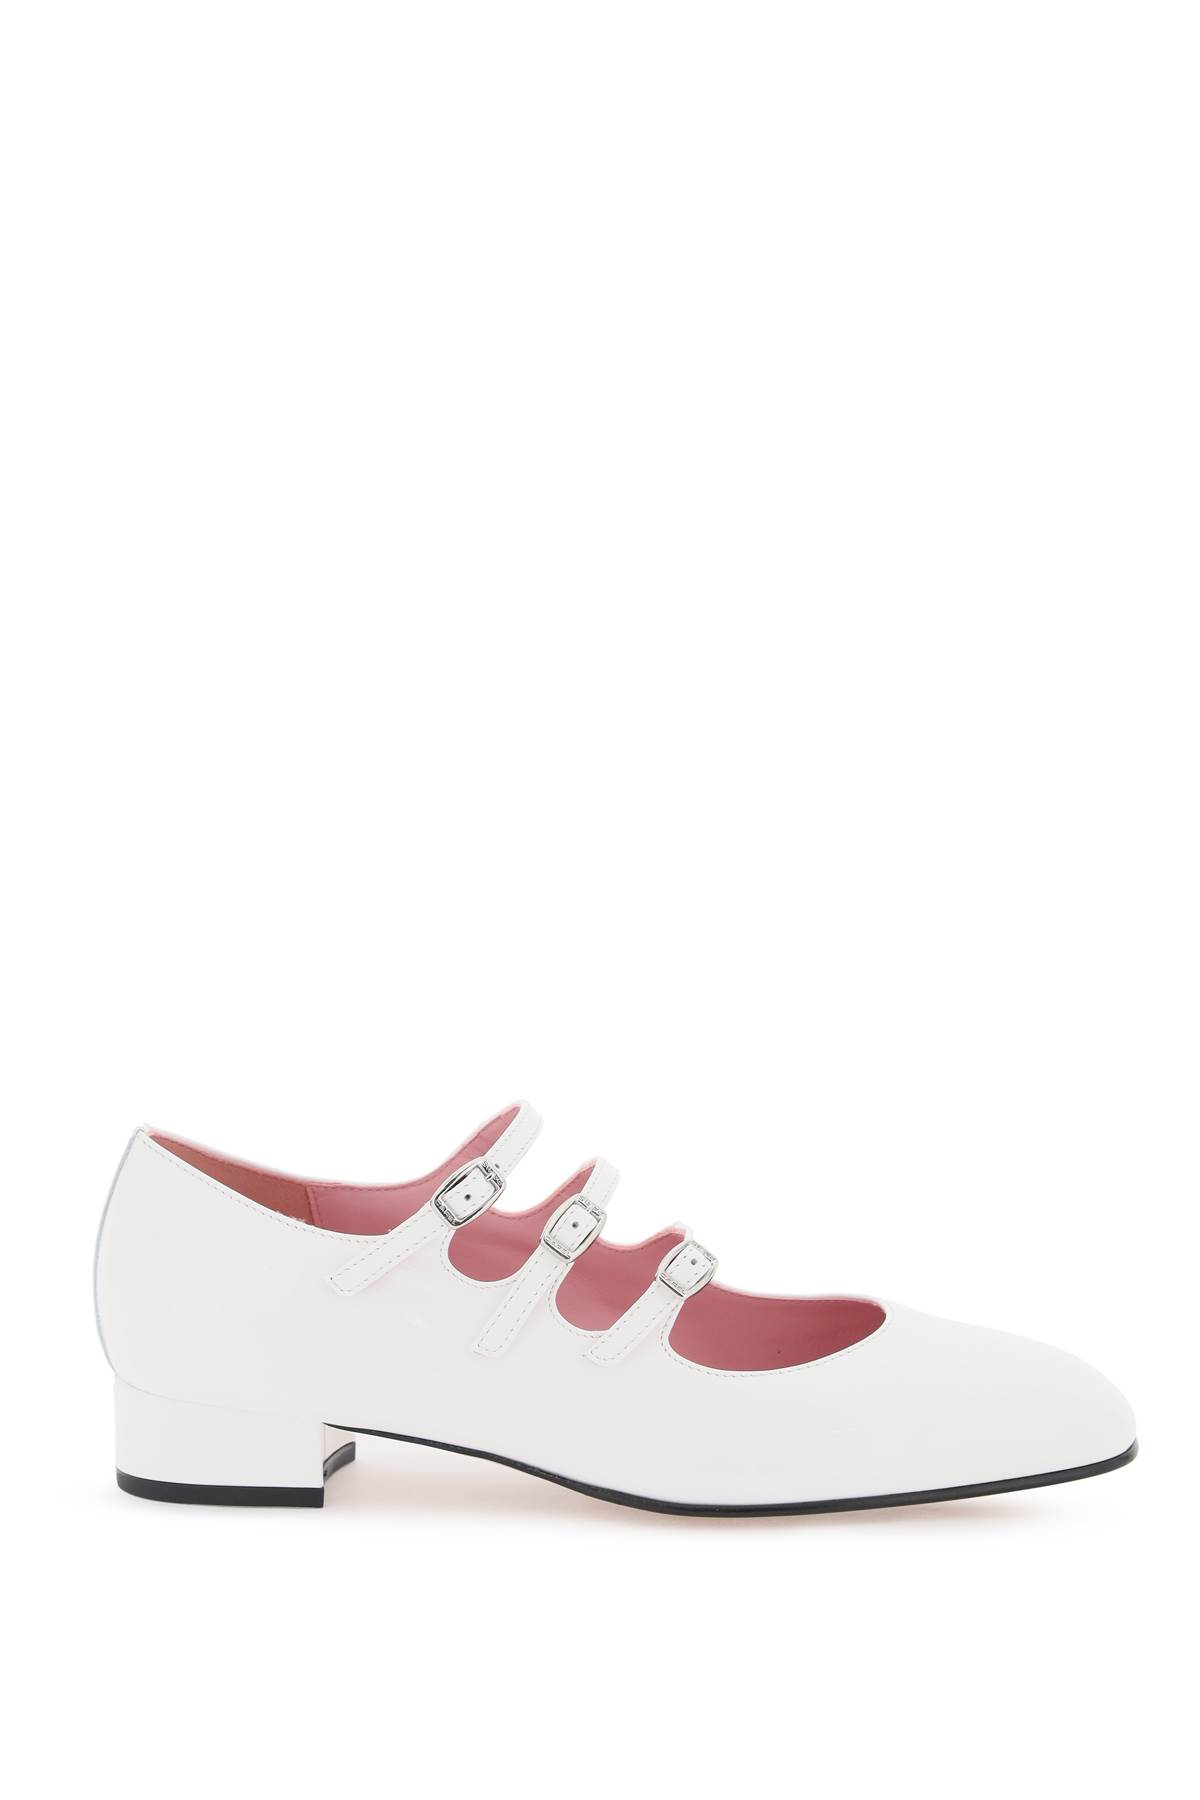 Shop Carel Patent Leather Ariana Mary Jane In White